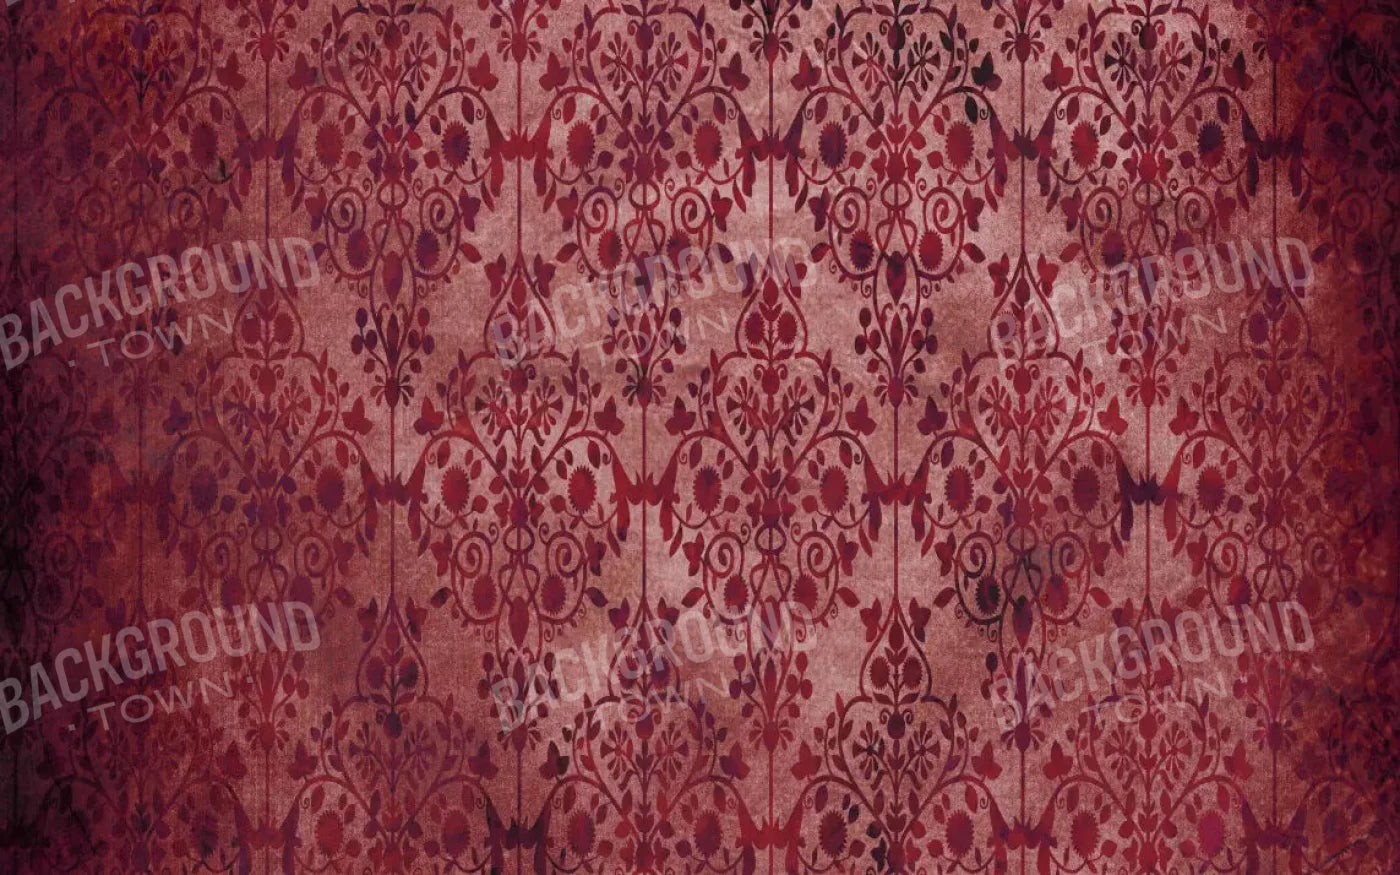 Shabby Red 14X9 Ultracloth ( 168 X 108 Inch ) Backdrop